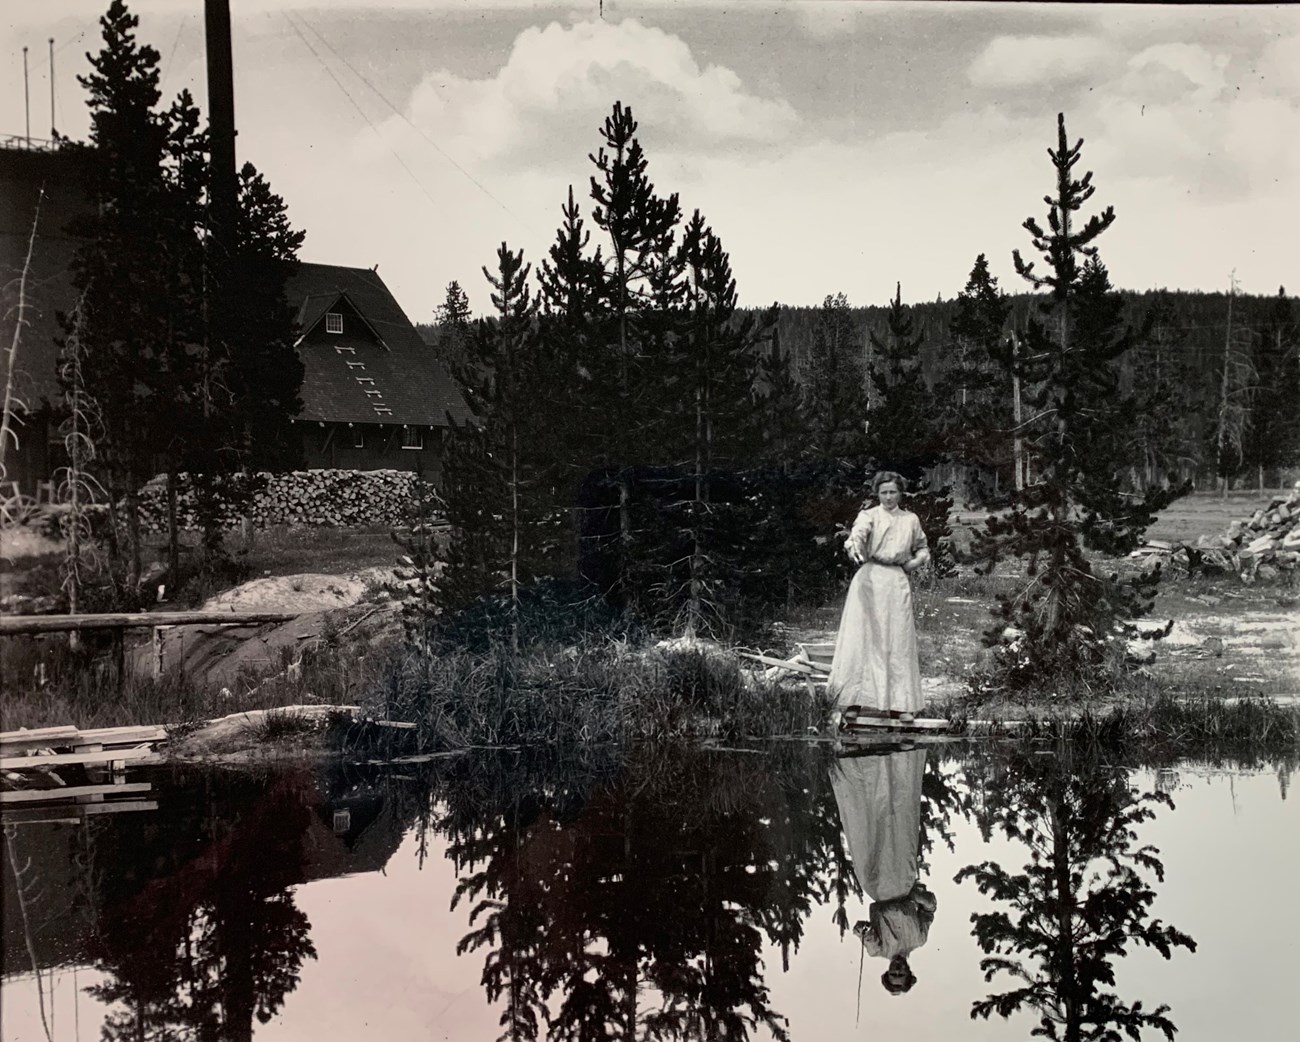 Woman in a long dress fishing in a lake with a large building behind